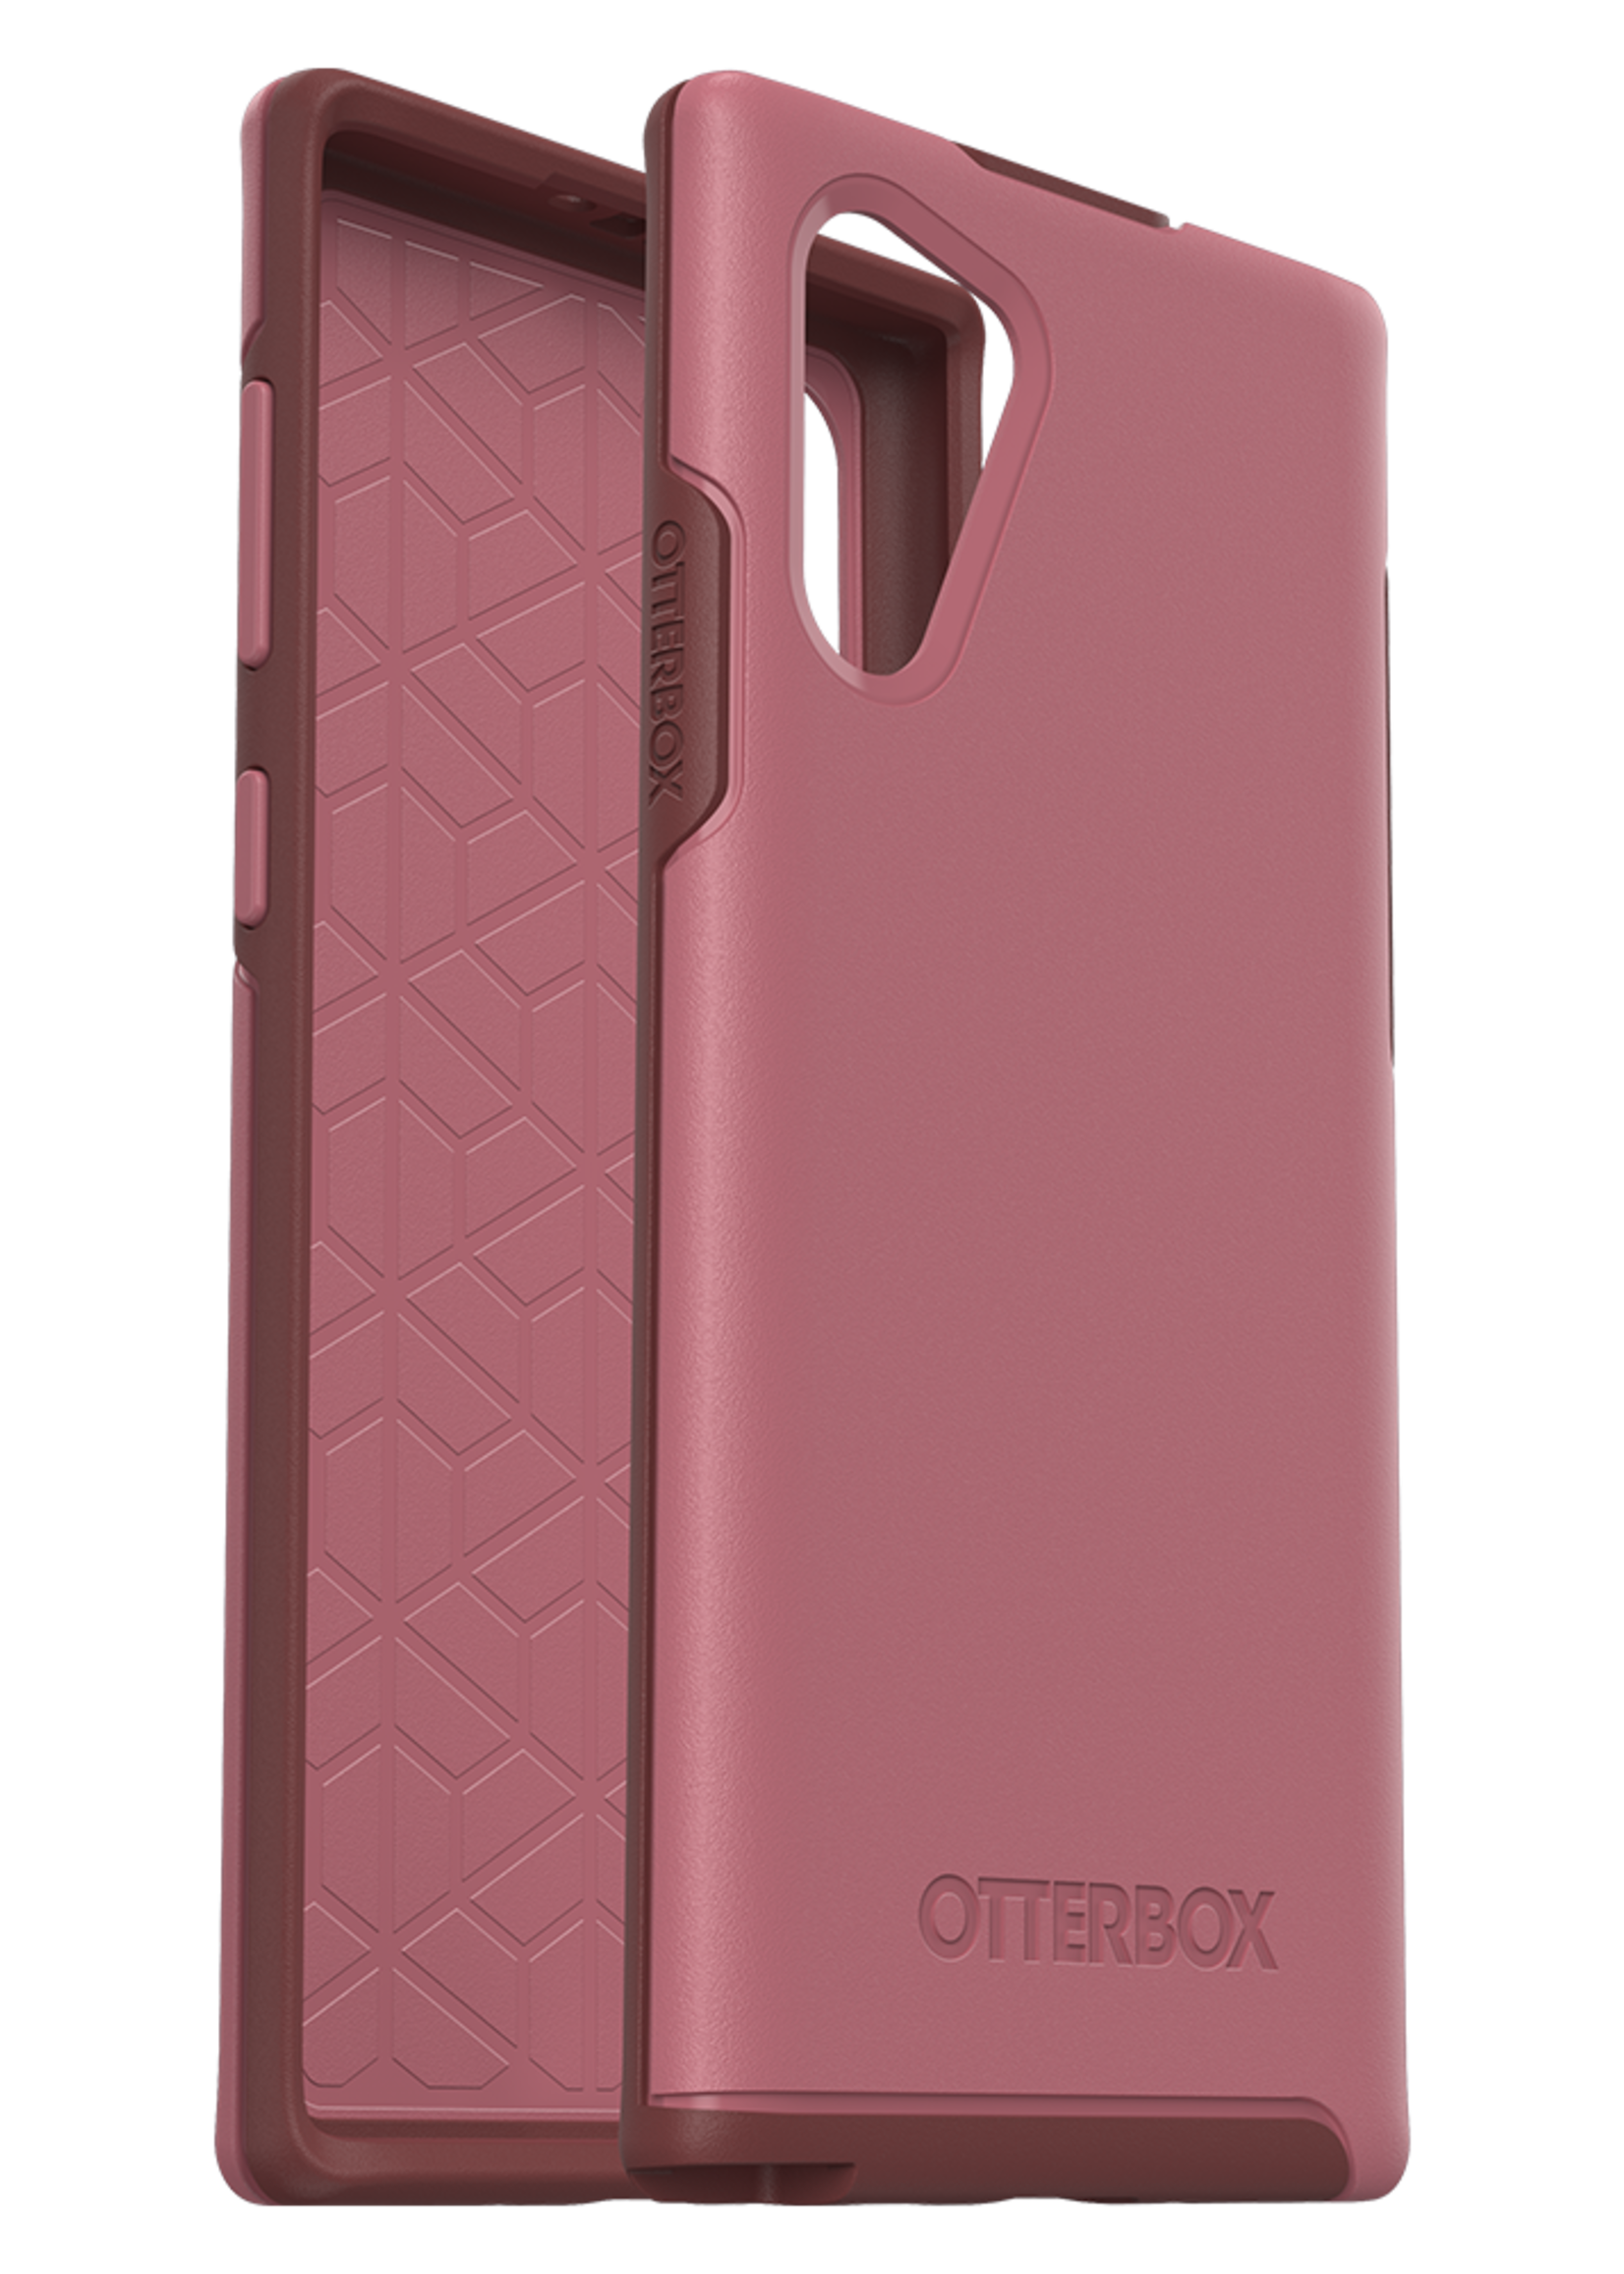 Otterbox OtterBox - Symmetry Case for Samsung Galaxy Note10 - Beguiled Rose